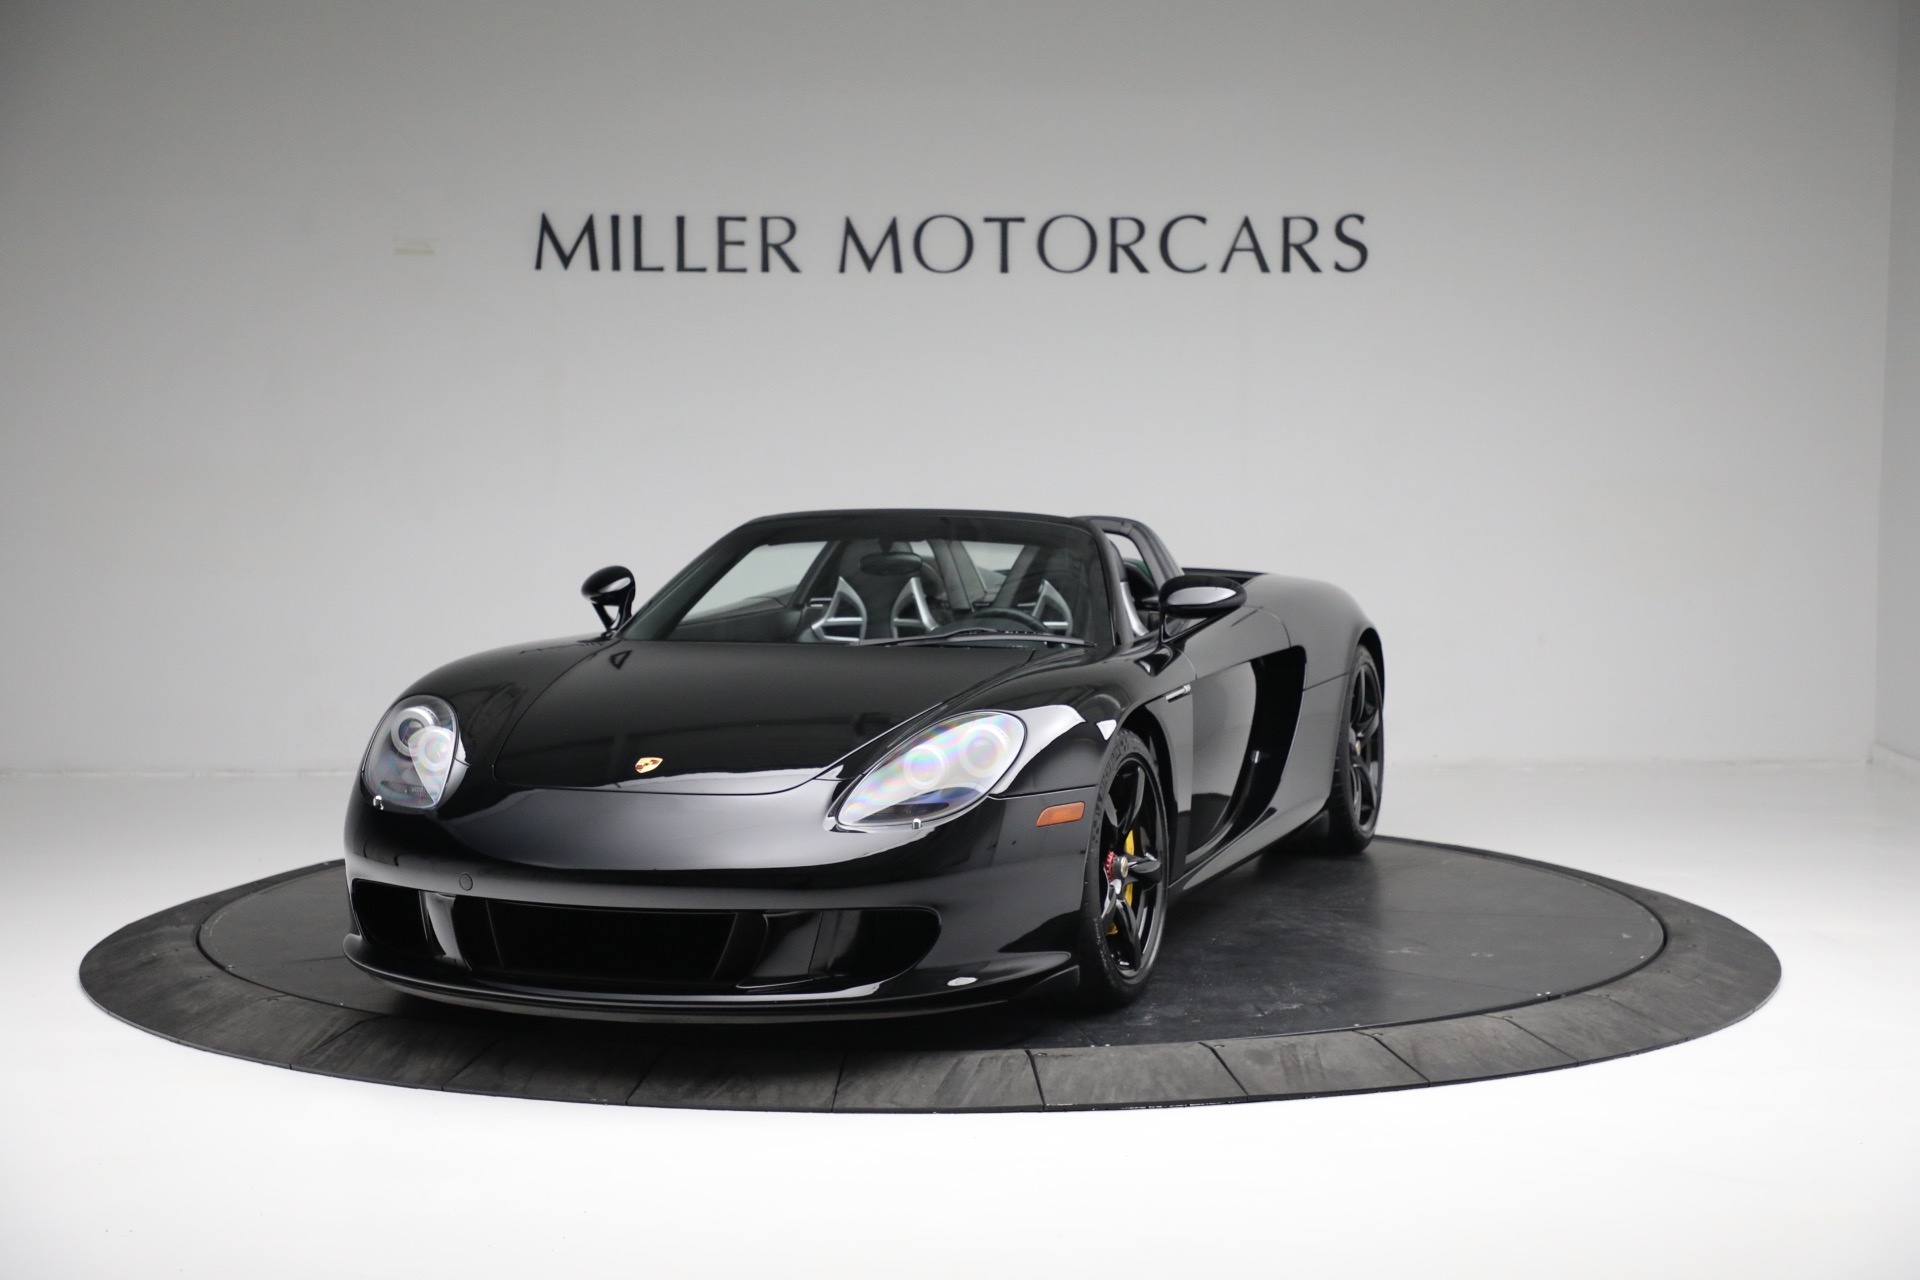 Used 2005 Porsche Carrera GT for sale $1,600,000 at Bentley Greenwich in Greenwich CT 06830 1